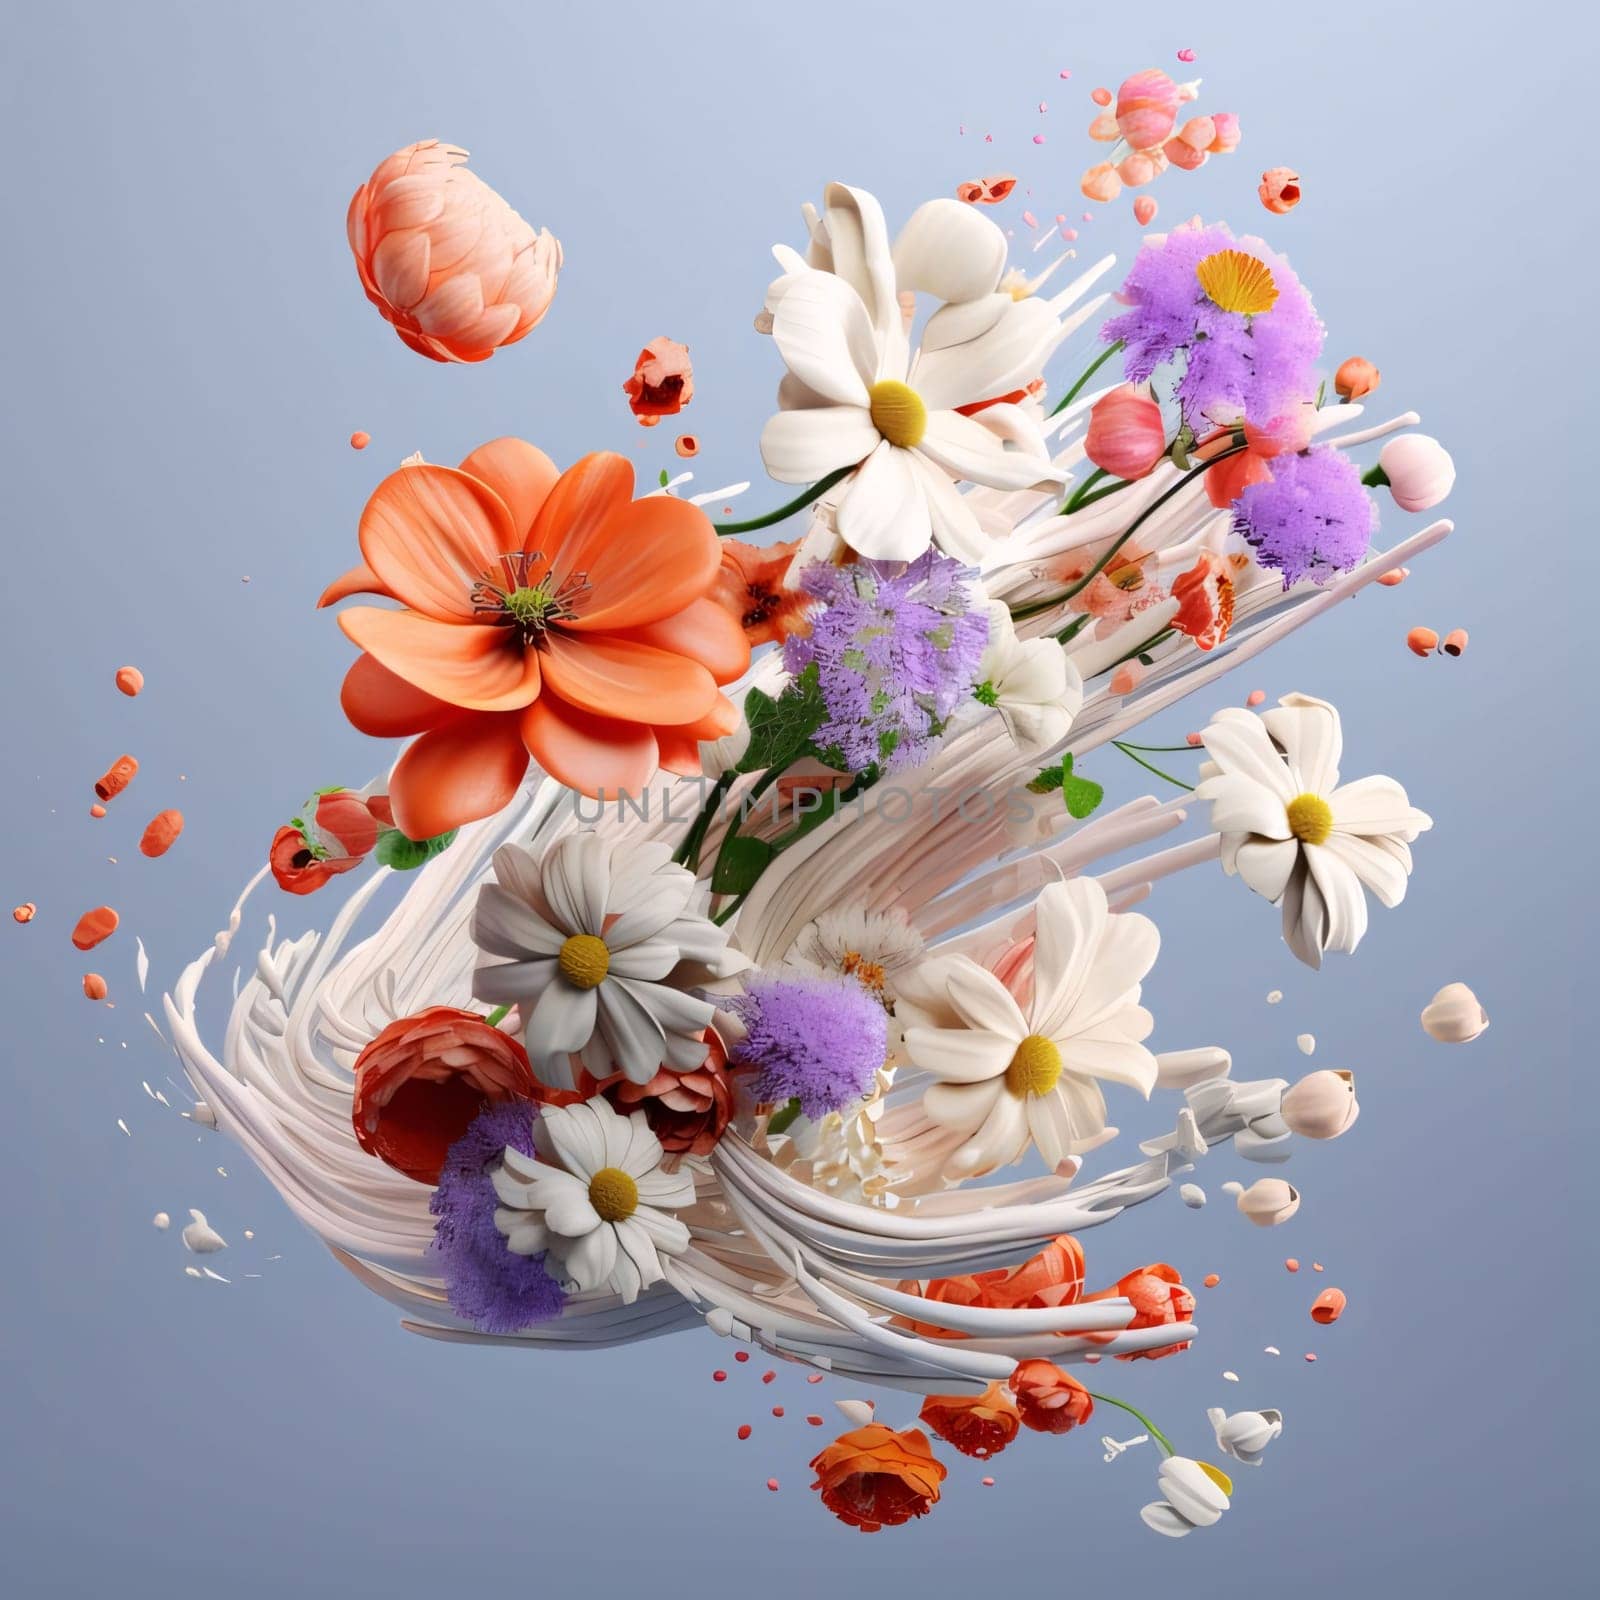 Abstract illustration of a vortex pulling in colorful flowers on a sample. Flowering flowers, a symbol of spring, new life. A joyful time of nature waking up to life.